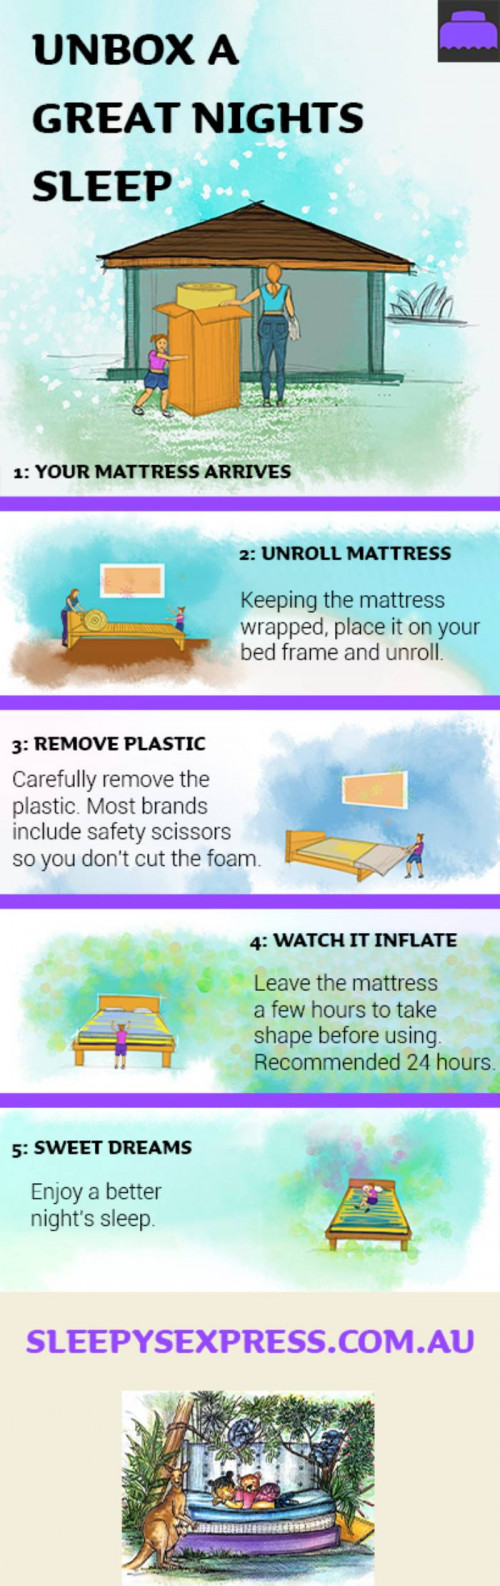 How to unbox your new mattress in a box and prepare yourself for a great night's sleep.
1: You purchase your mattress online and it arrives.
2. Unroll your mattress on your bed frame.
3. Remove the plastic wrapping on the bed, be careful not to nip the mattress.
4. Leave a few hours to let the mattress inflate. It’s recommended to wait 24 hours.
5. Enjoy a great night's sleep
Check out our best mattresses in Australia and other posts at sleepysexpres.com
https://sleepysexpress.com.au/guides/best-mattress/